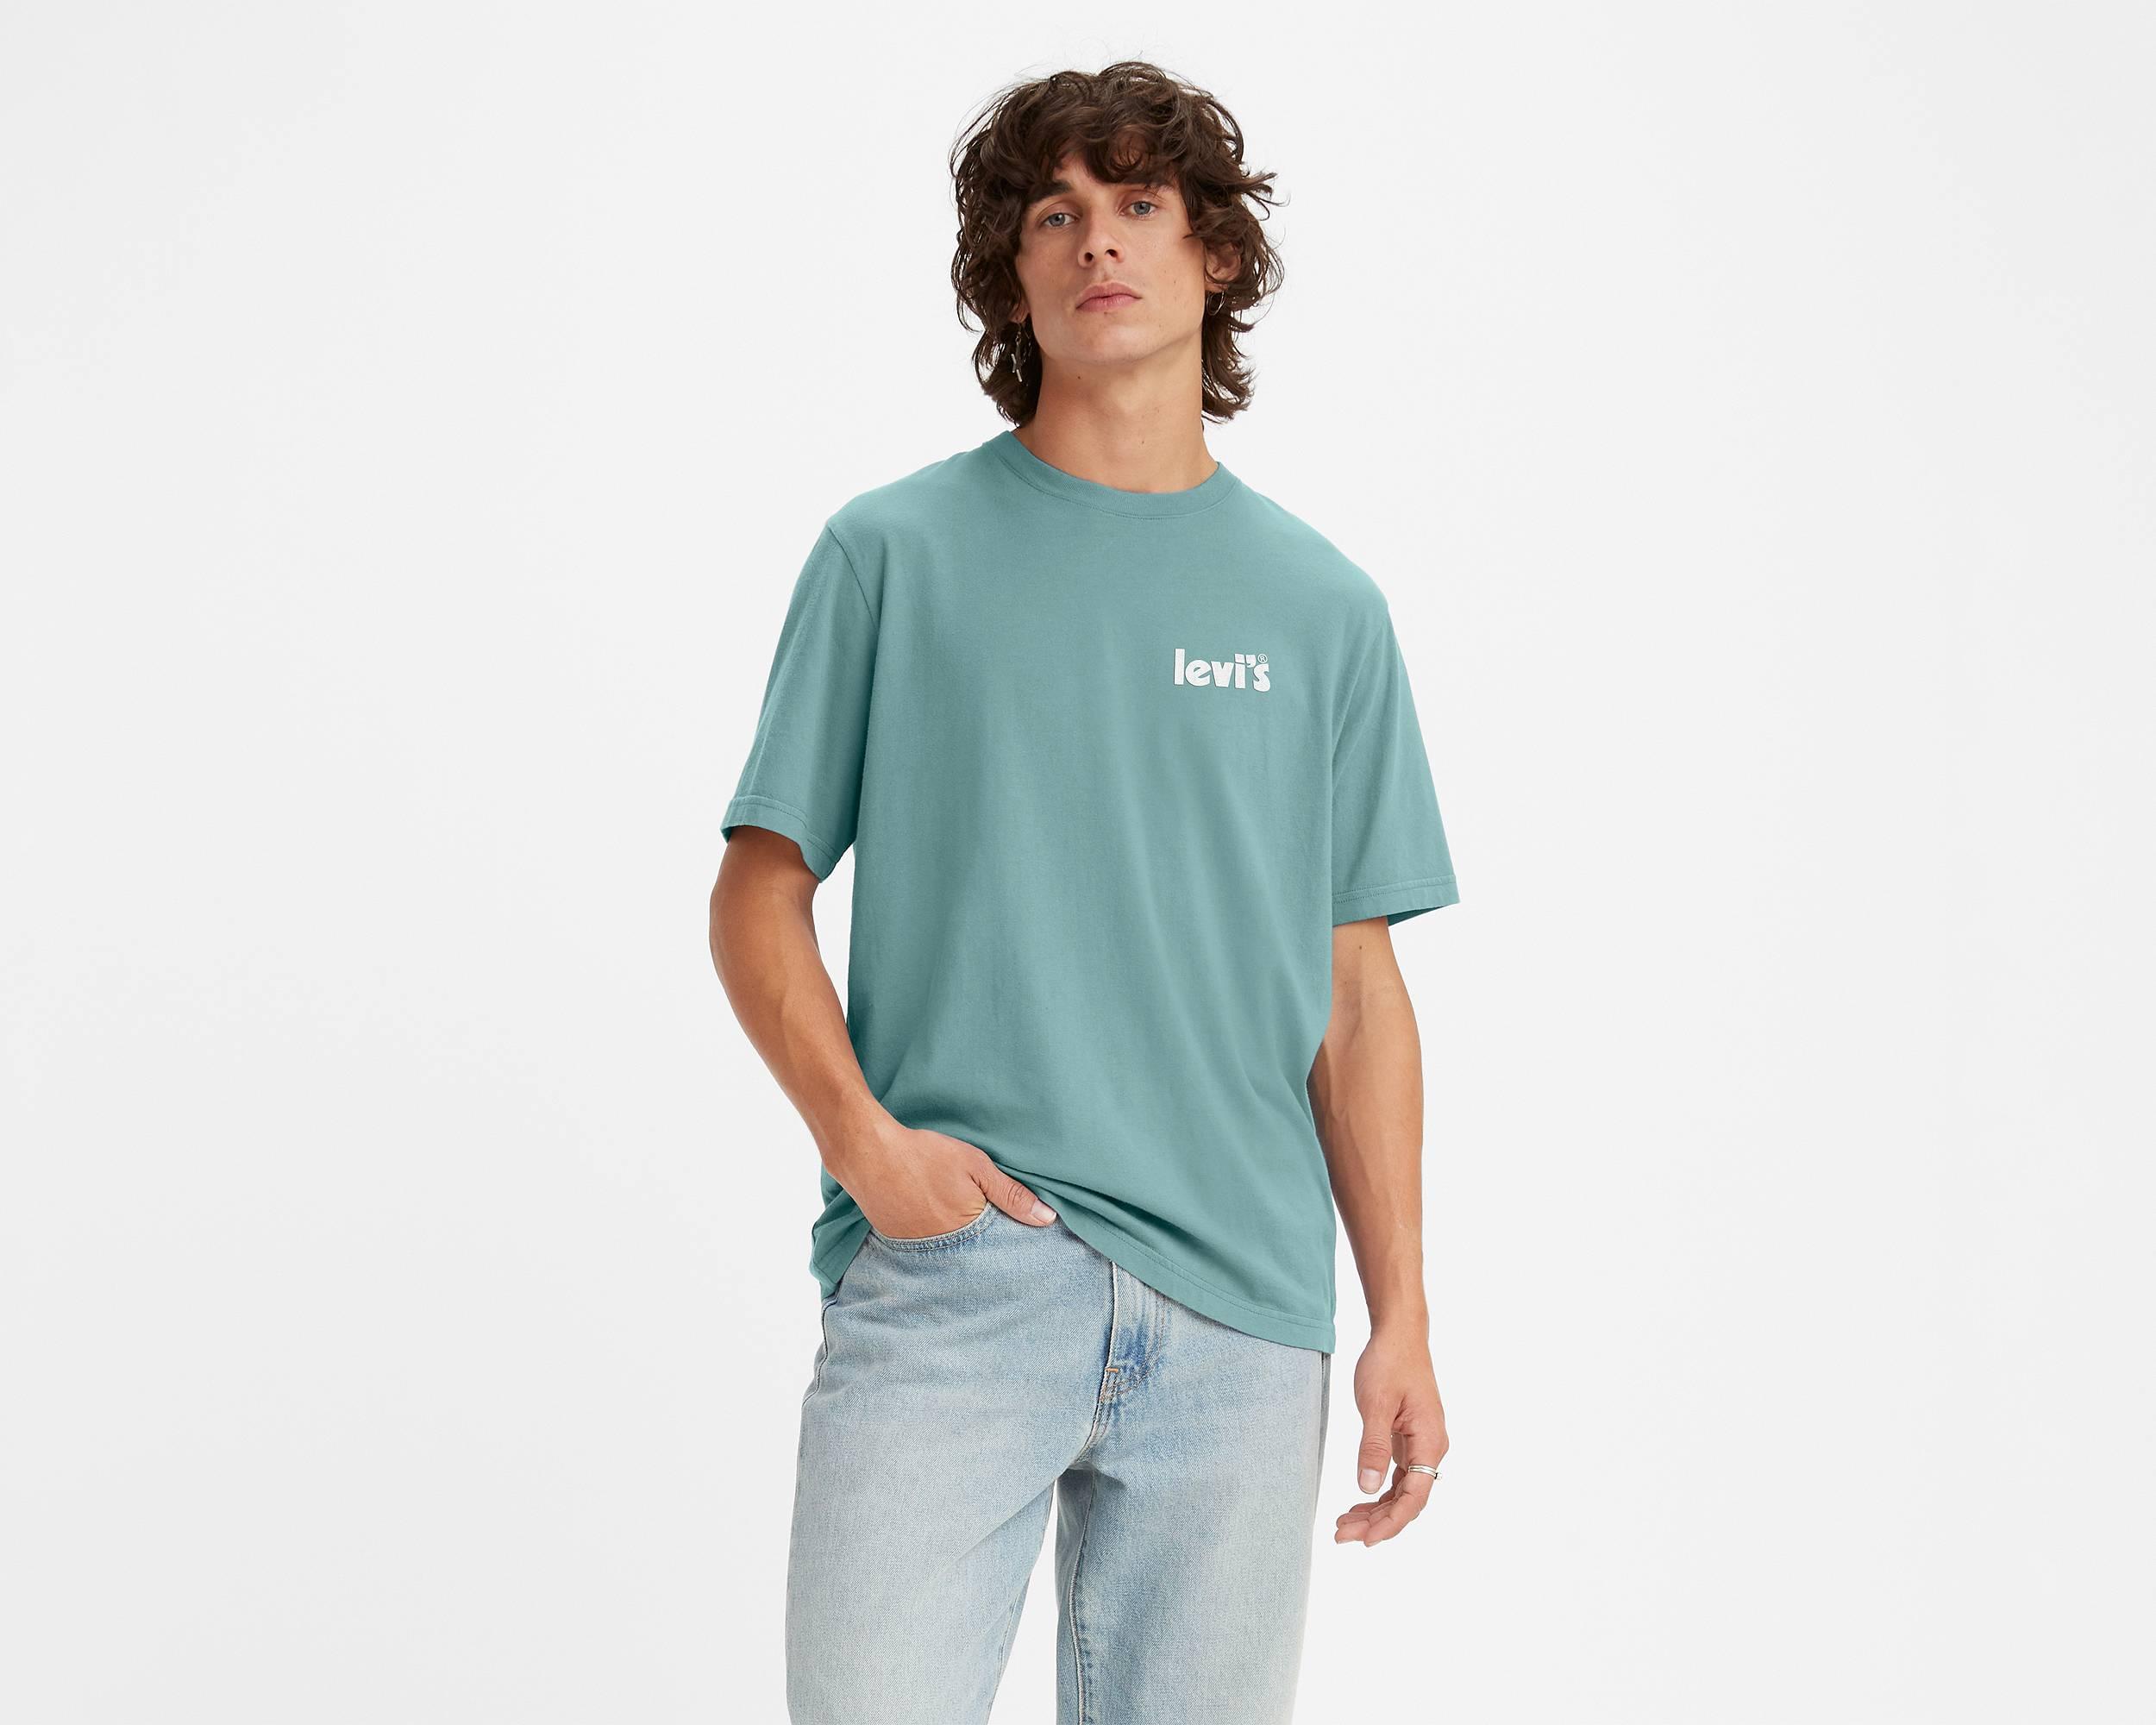 Relaxed Fit Tee (Big & Tall) - Levi's Jeans, Jackets & Clothing